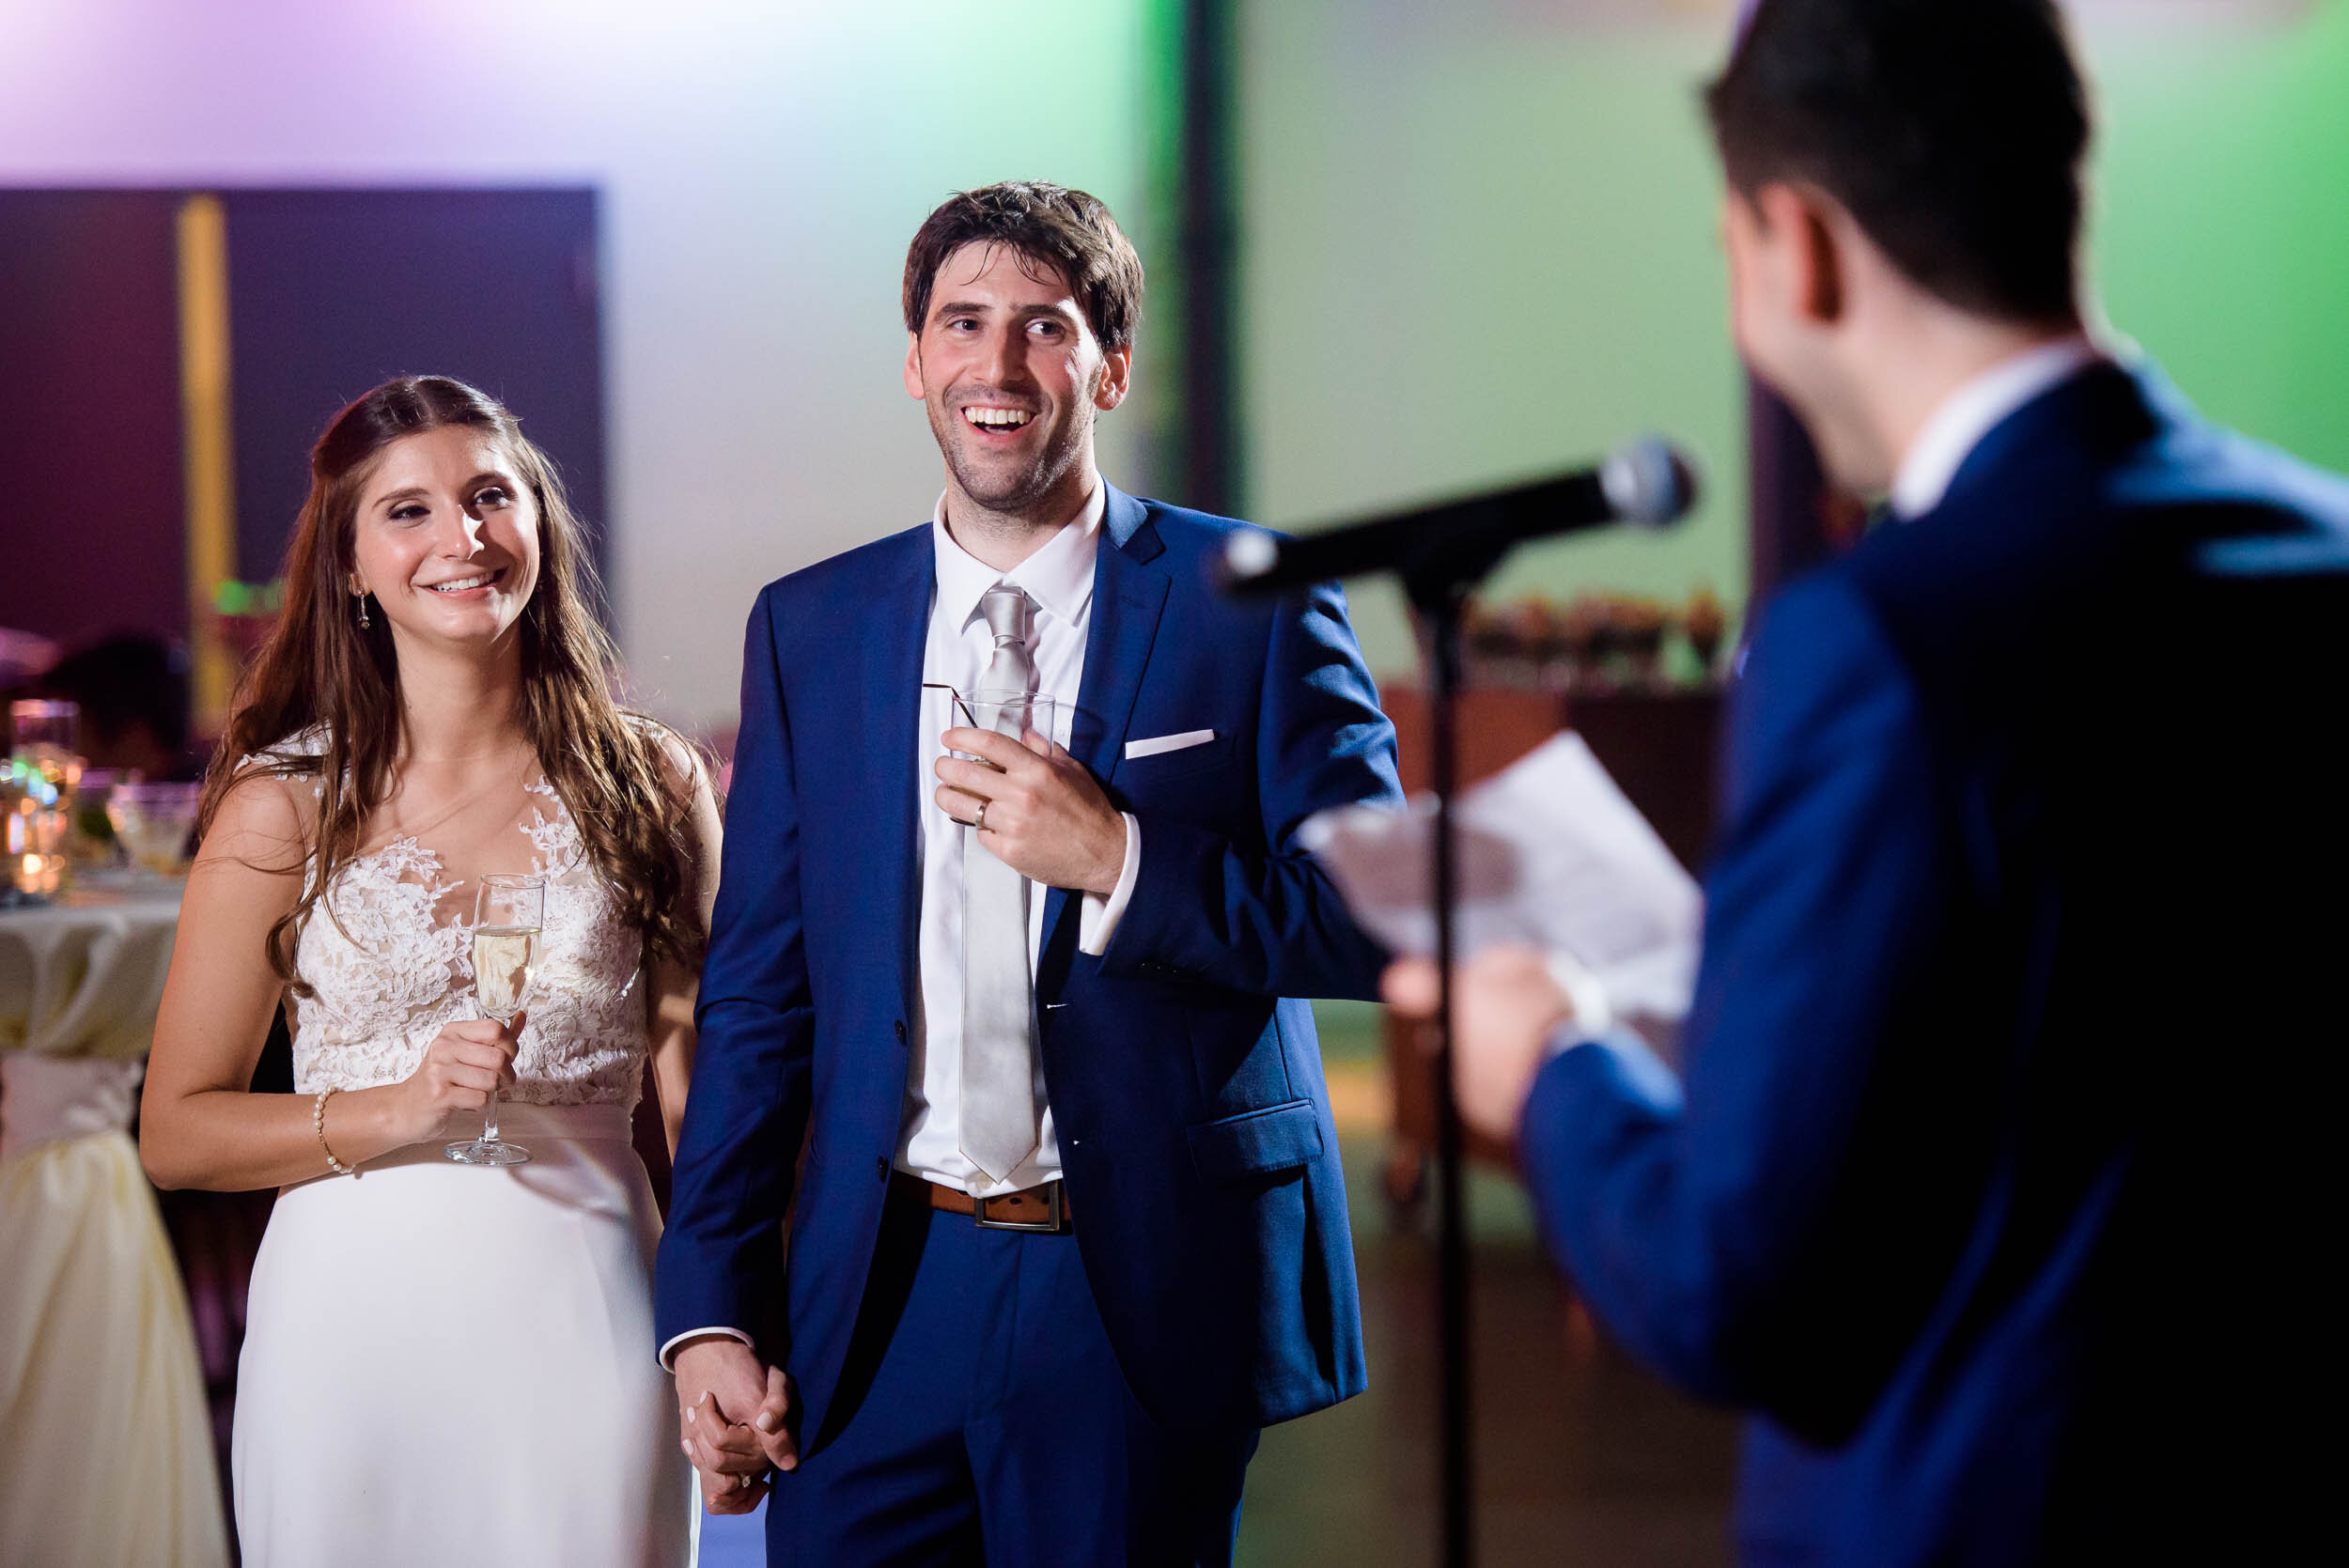 Couple laughs during the best man speech: Ravenswood Event Center Chicago wedding captured by J. Brown Photography.  